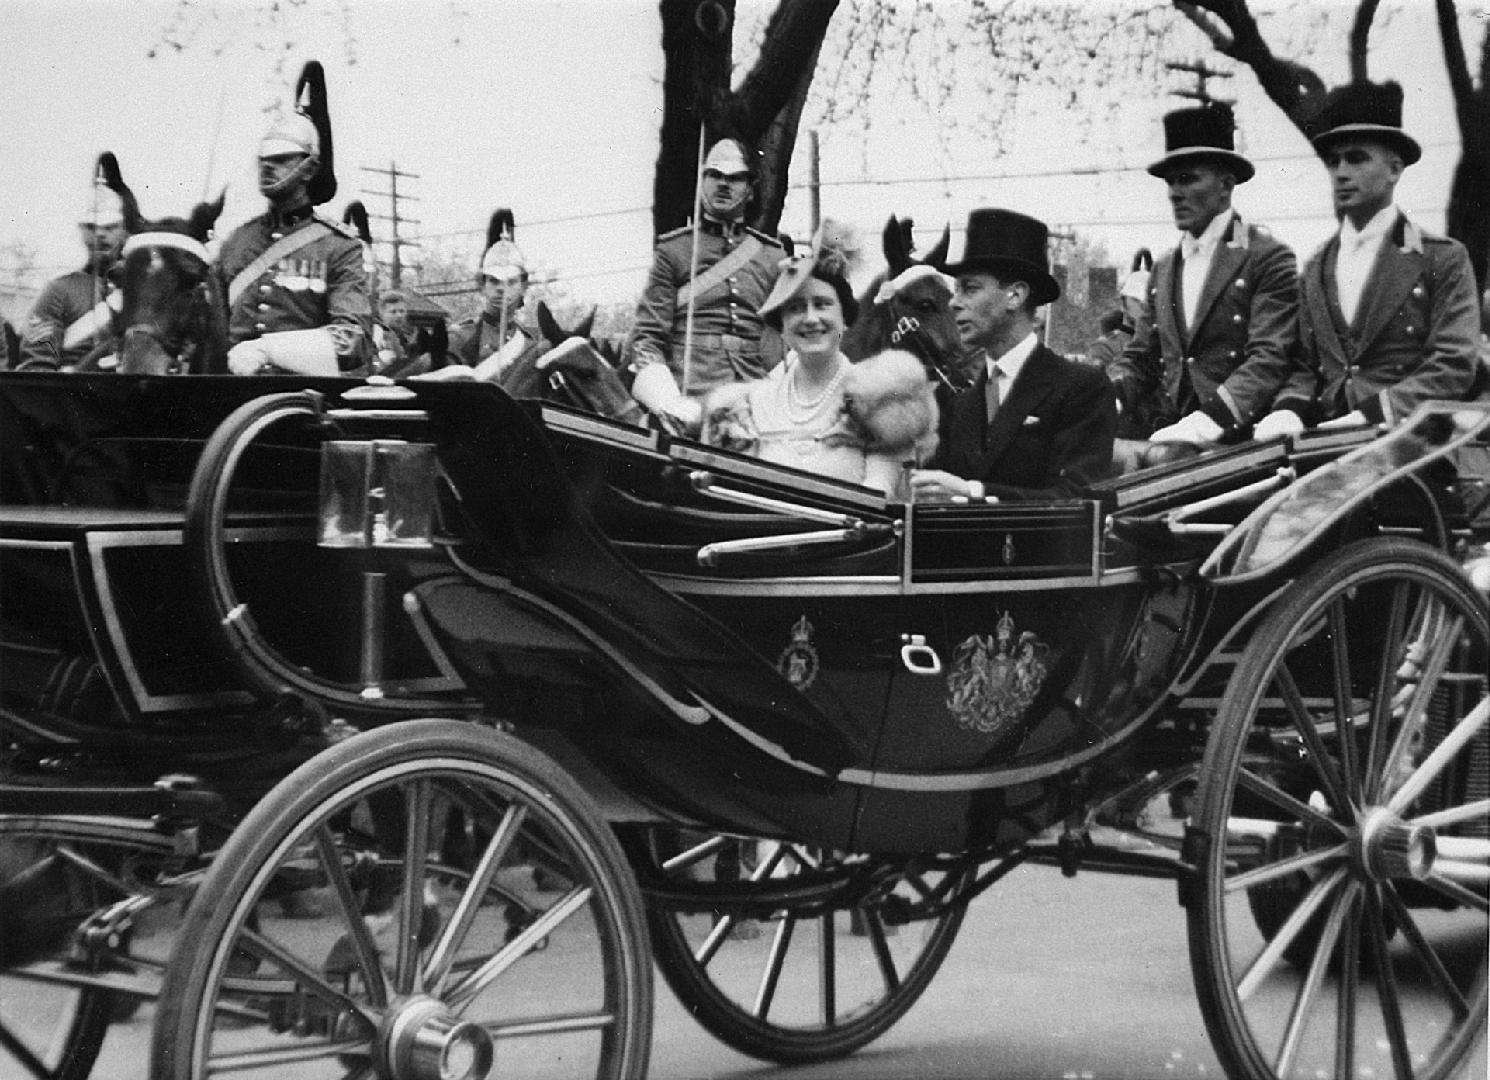 George VI, visit to Toronto, 22 May 1939, at the King's Plate, Woodbine (now Greenwood) Race Track, Queen Street East